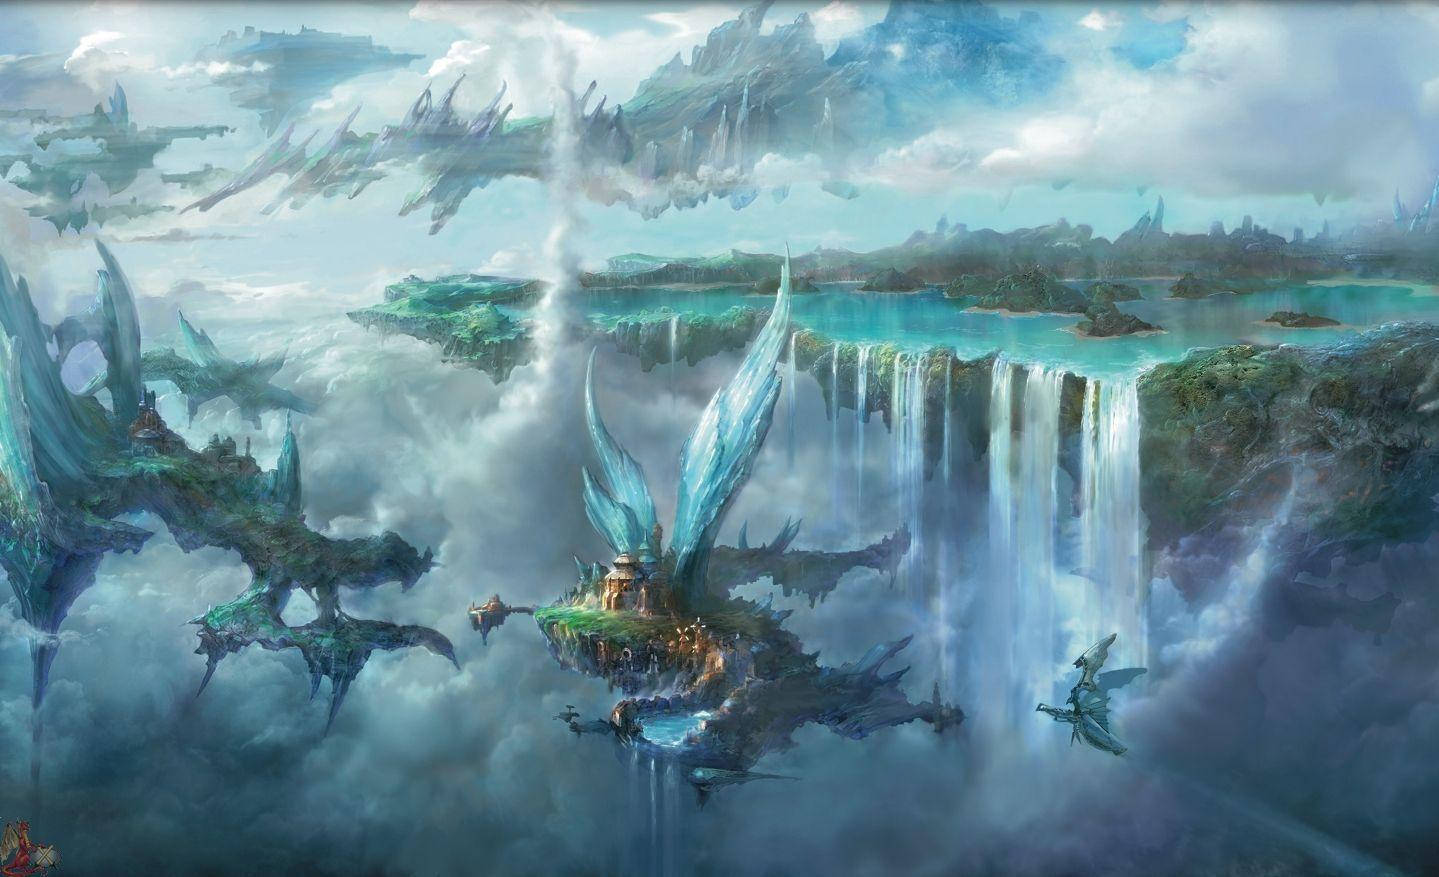 A Painting Of A Fantasy World With A Waterfall And Flying Creatures Background